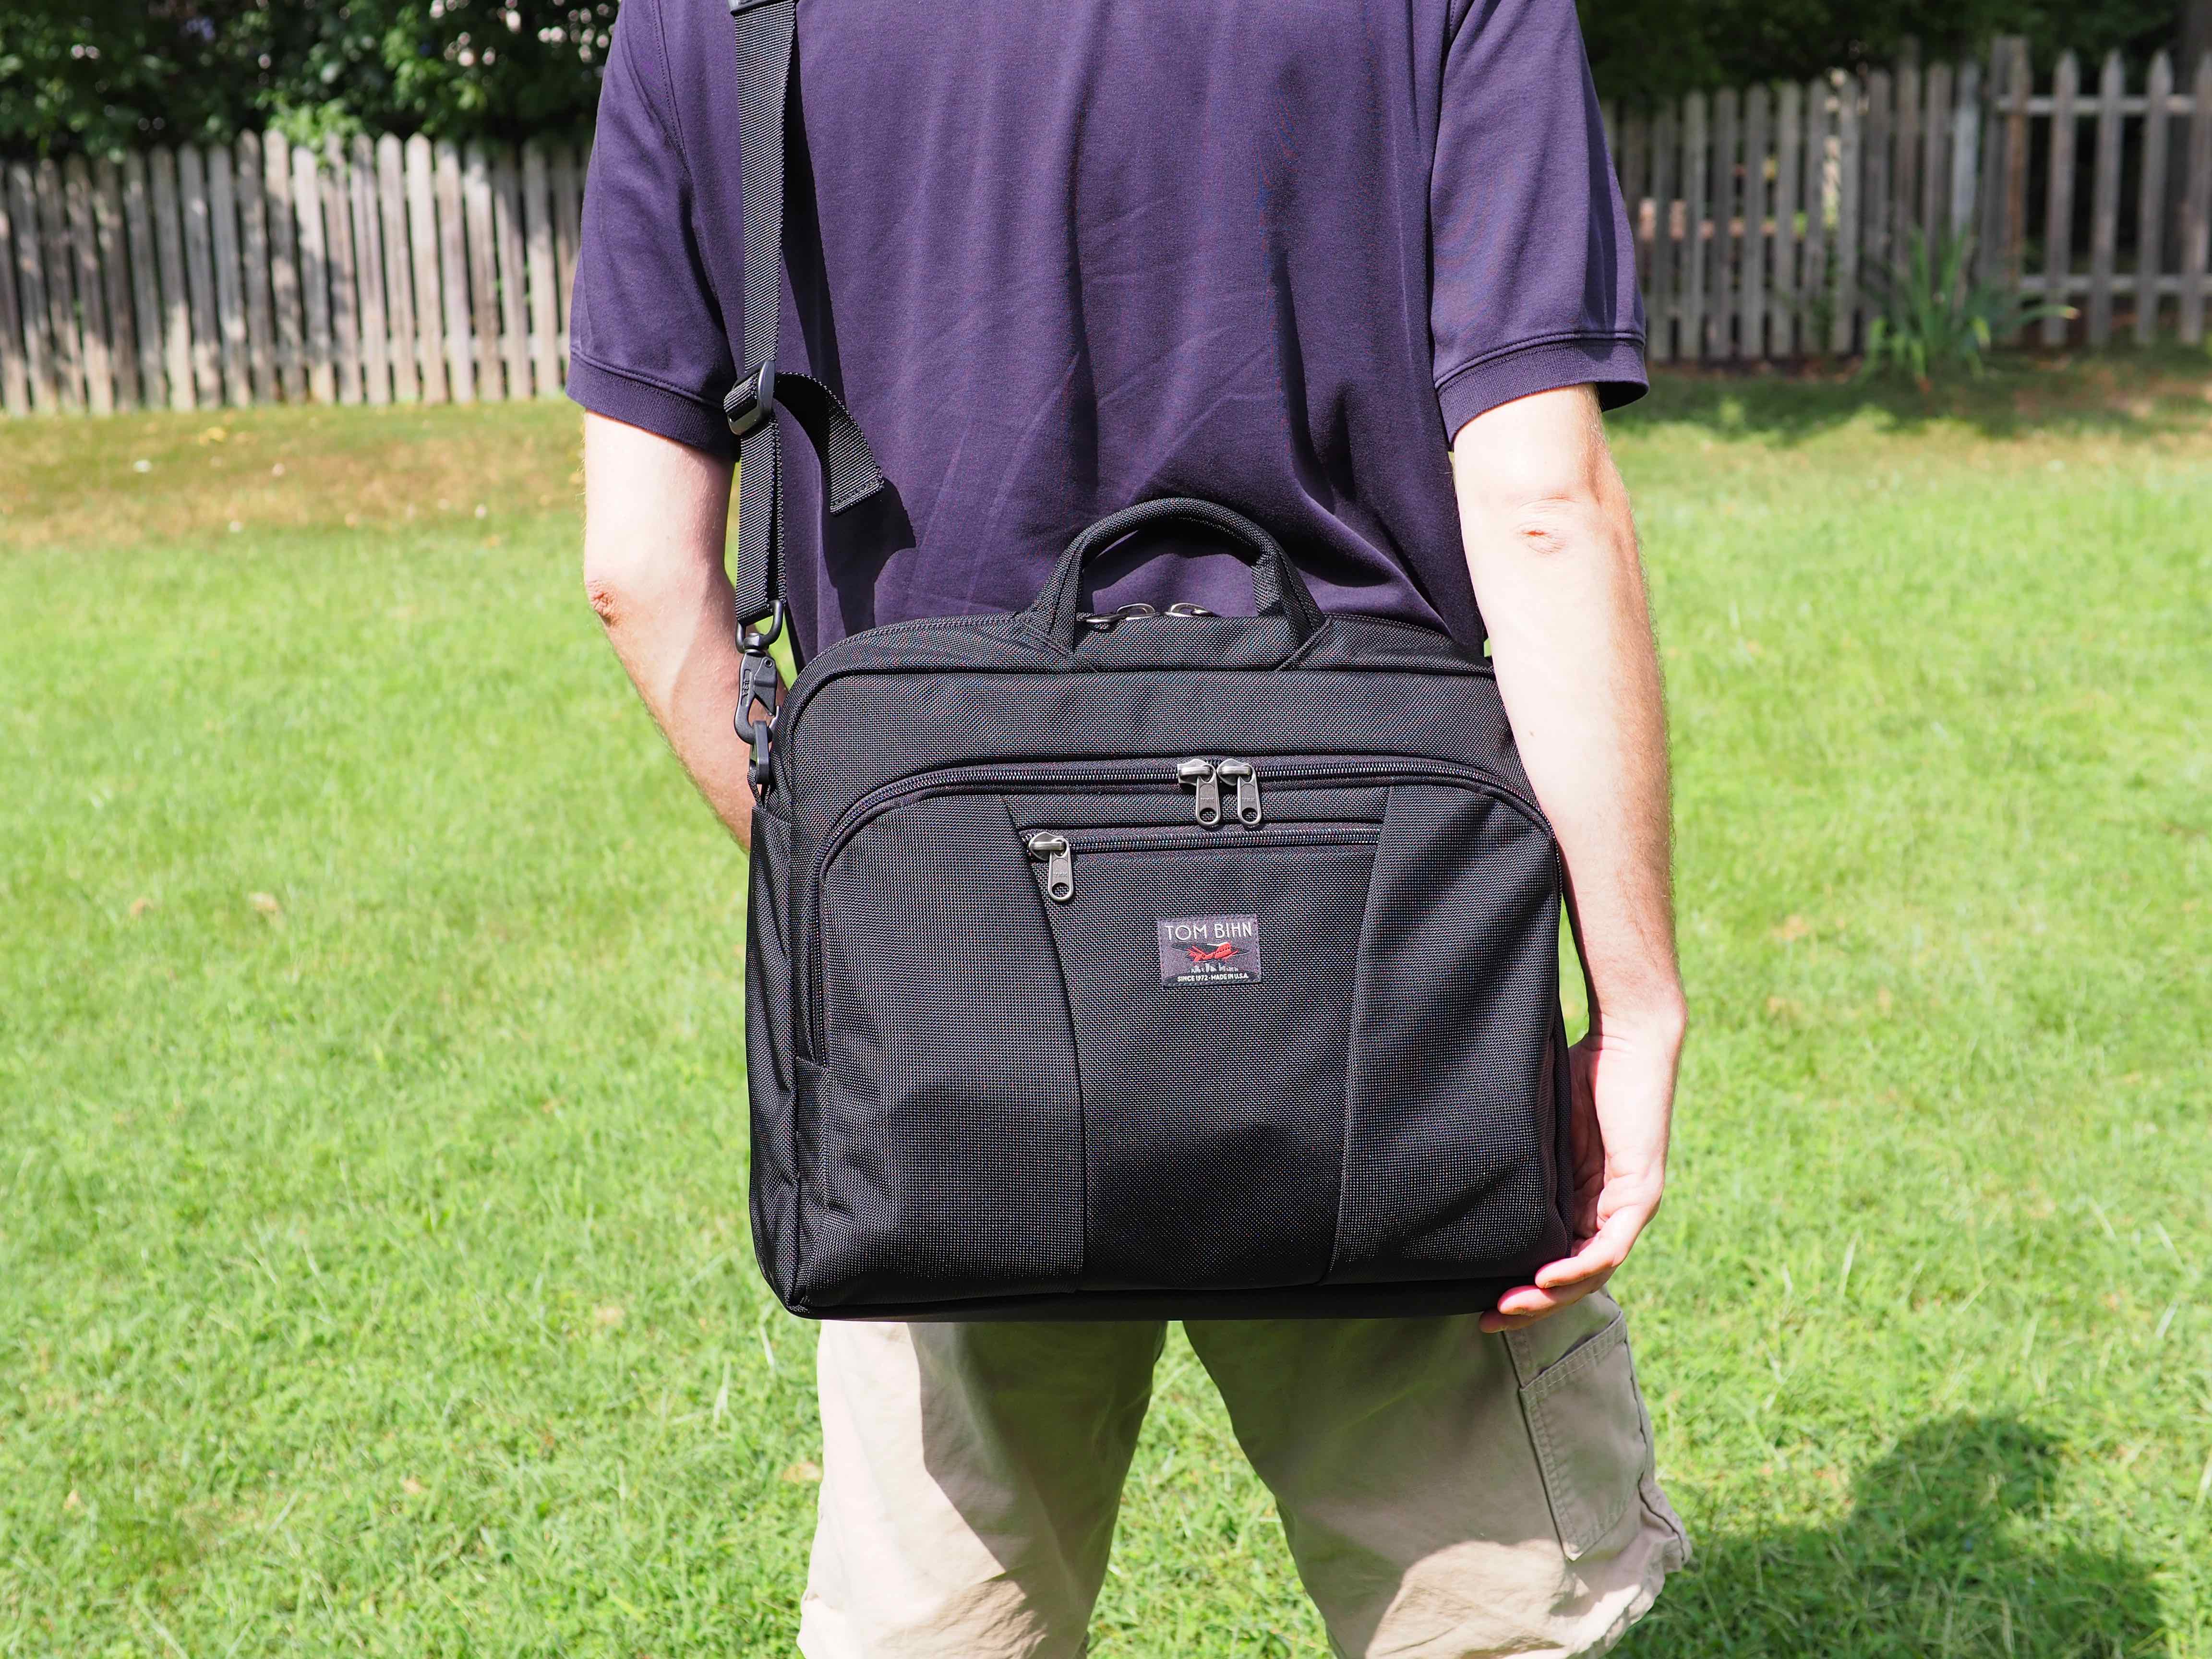 The Tom Bihn Cadet — Liss is More